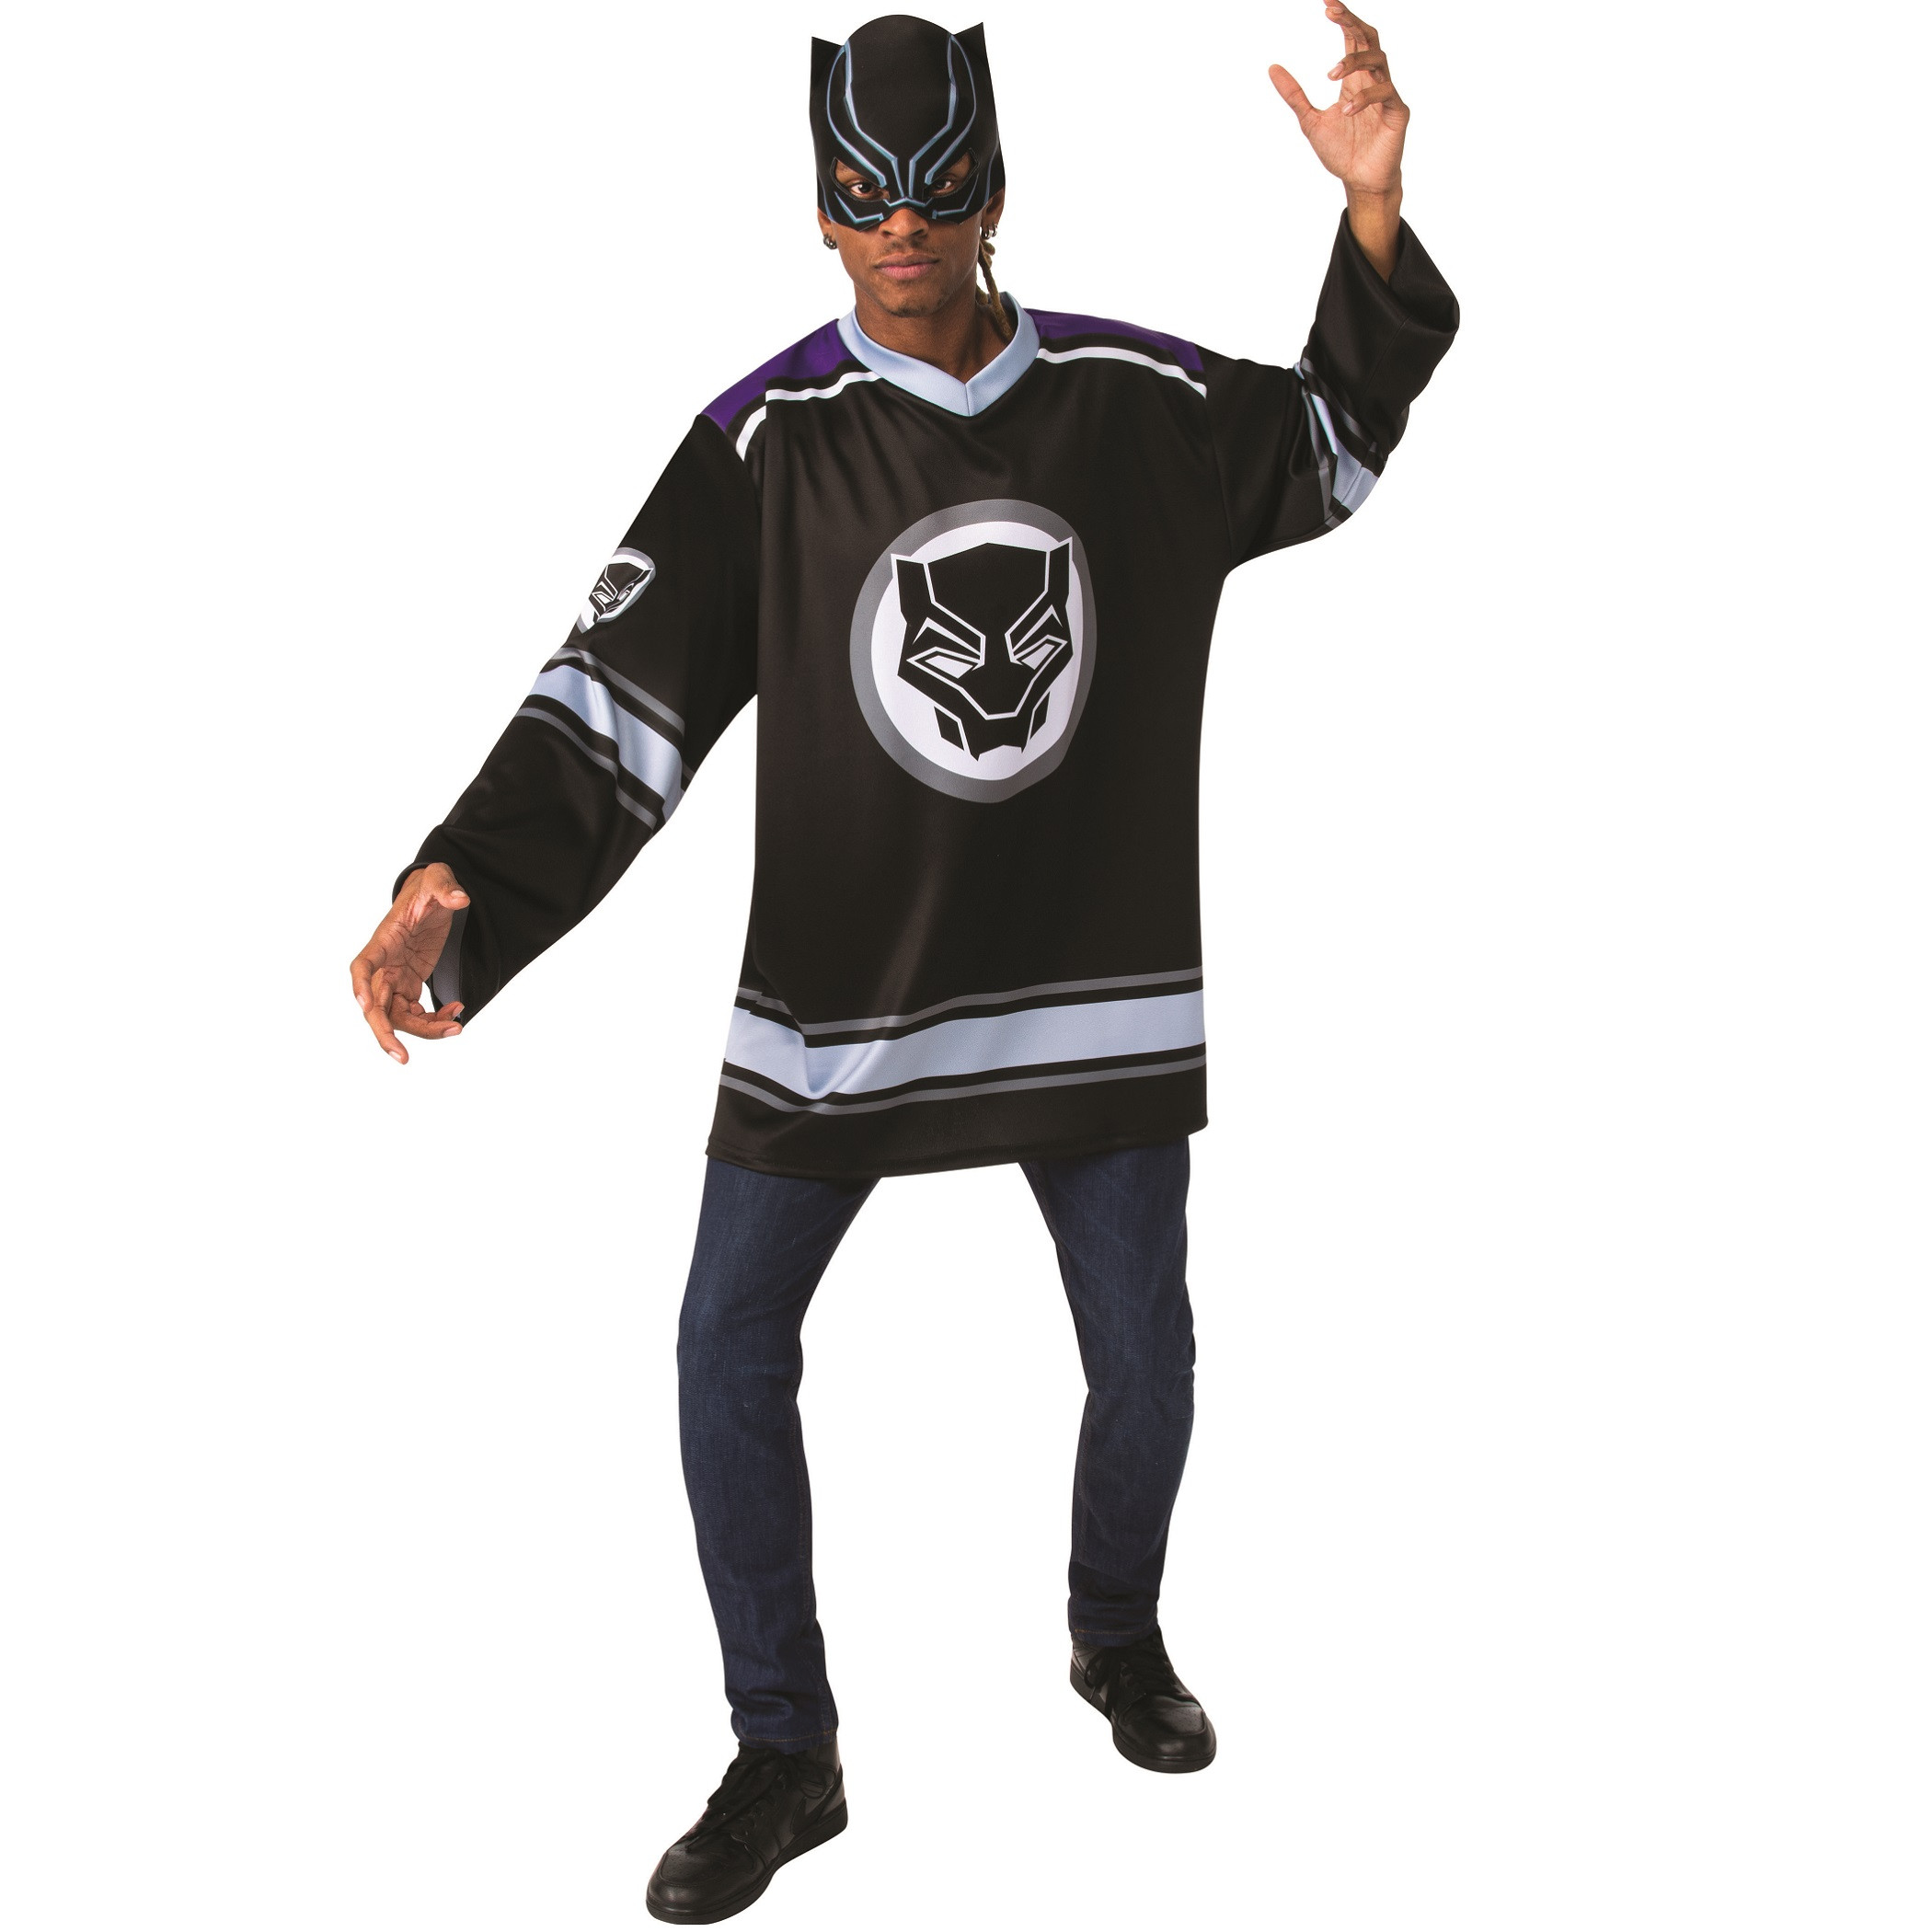 Black Panther Hockey Jersey and Mask